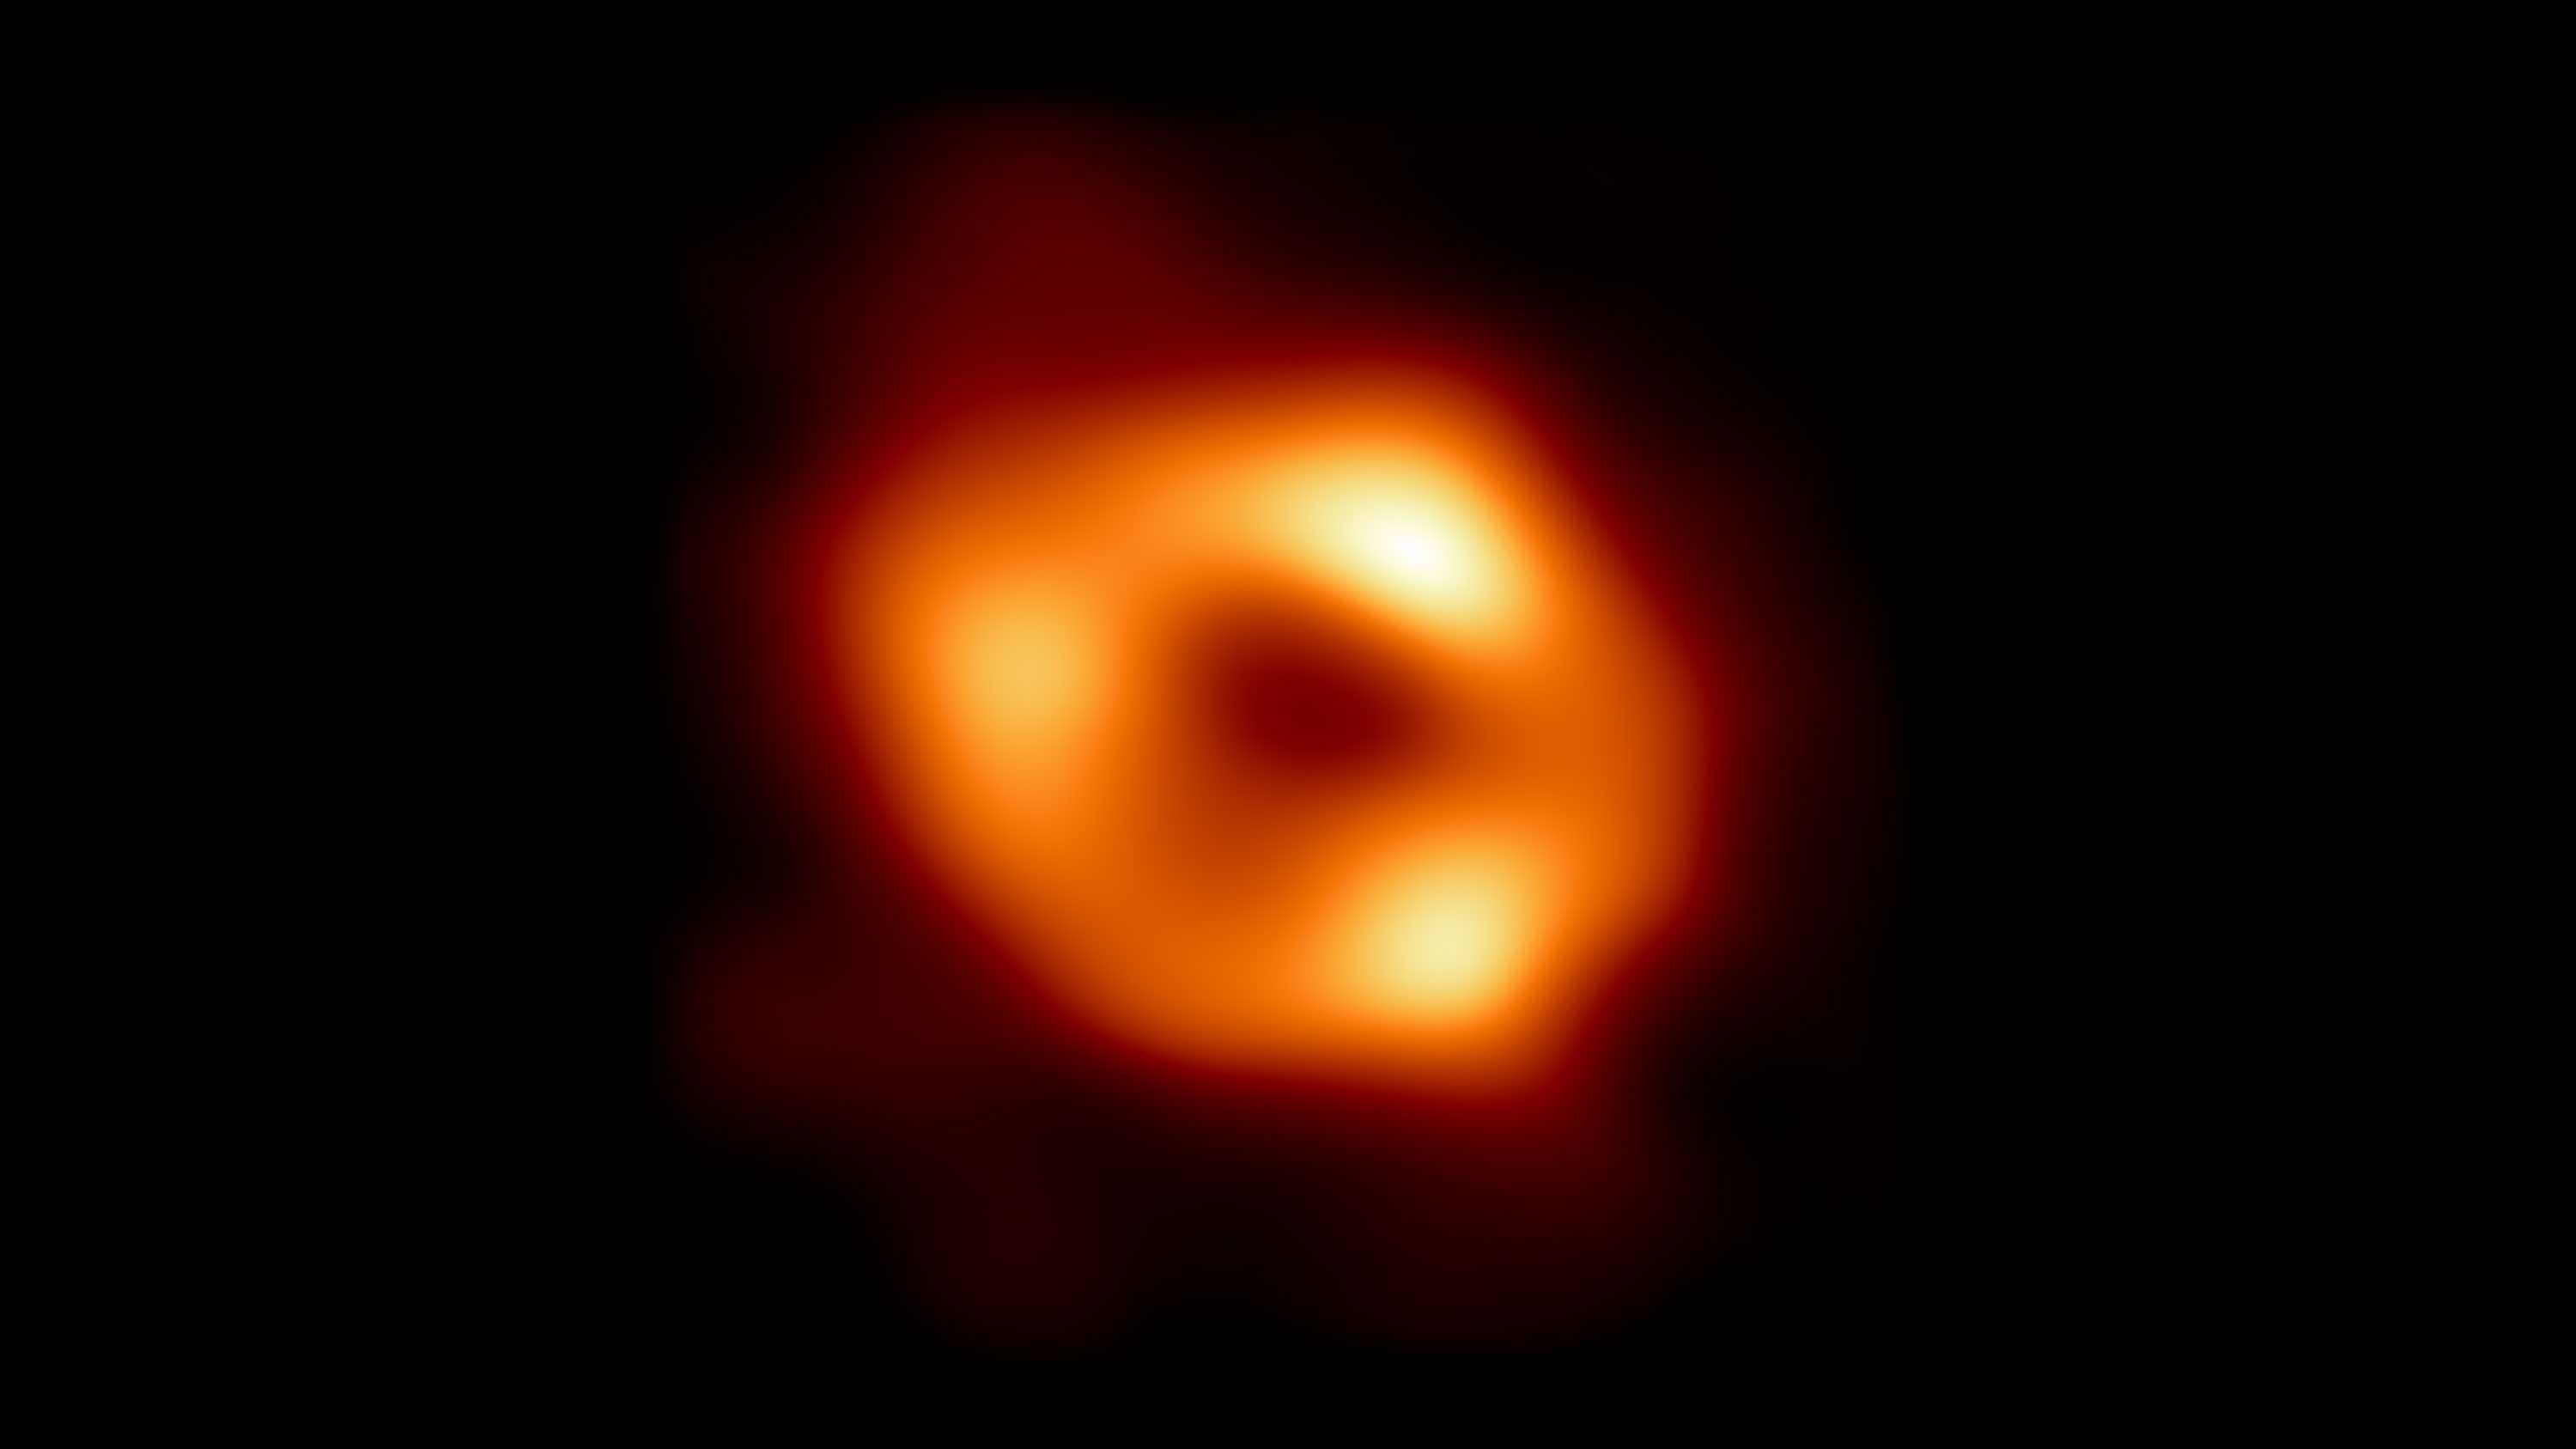 In May, astronomers captured the first image of a supermassive <a href="https://www.cnn.com/2022/05/12/world/milky-way-center-black-hole-image-scn/index.html" target="_blank">black hole</a> at the center of the Milky Way.